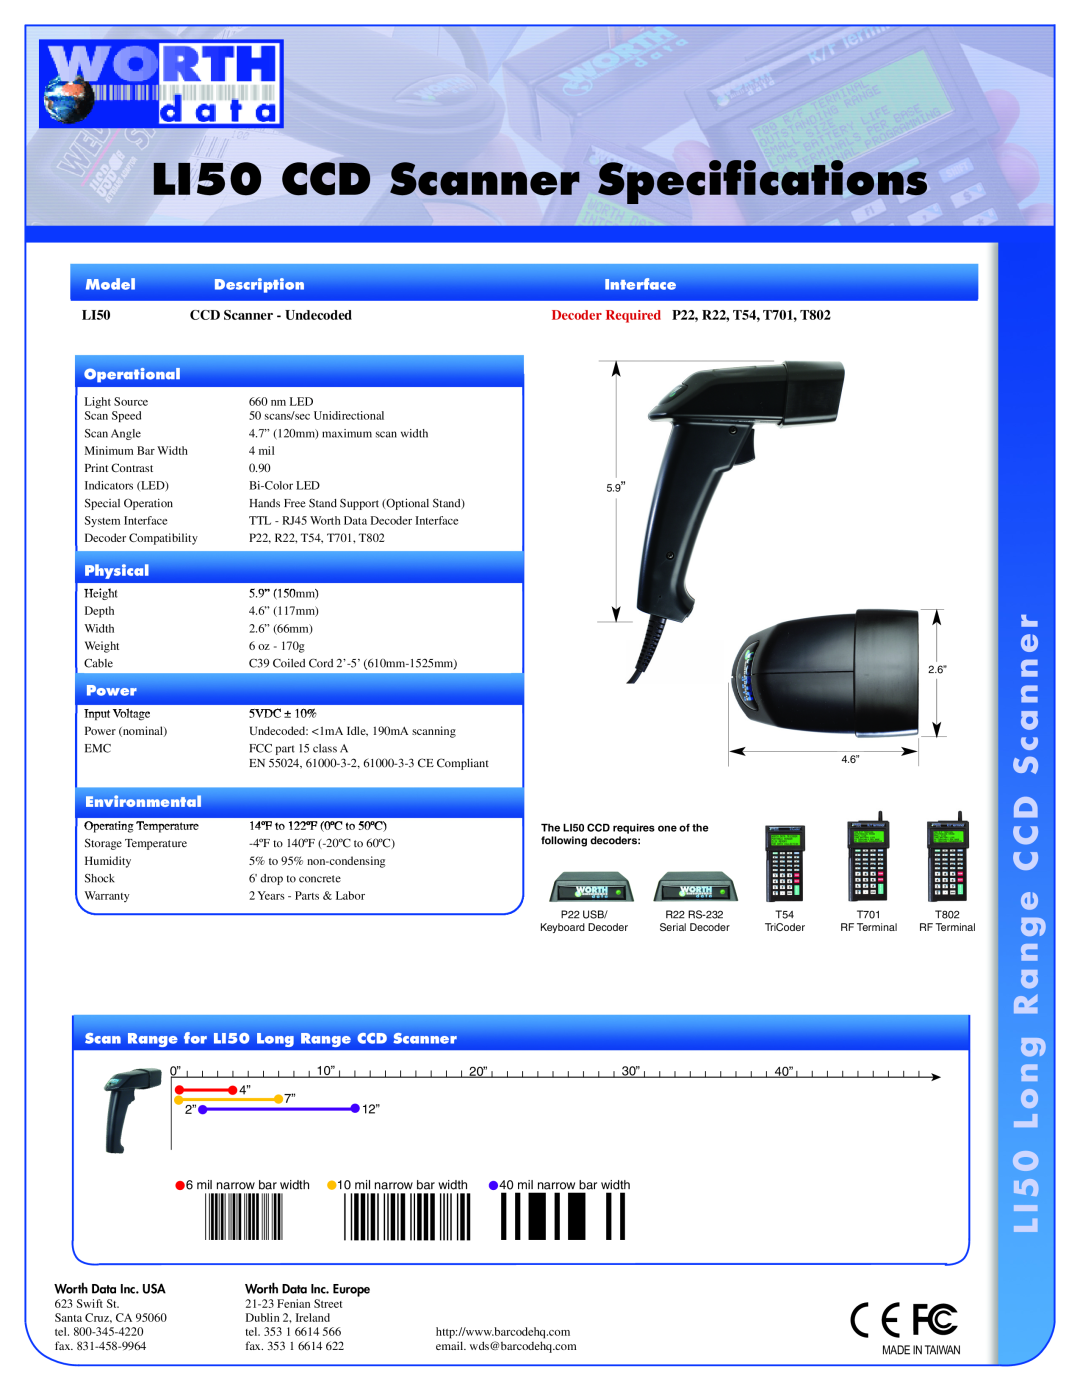 Worth Data specifications LI50 CCD Scanner Specifications, R a n g 